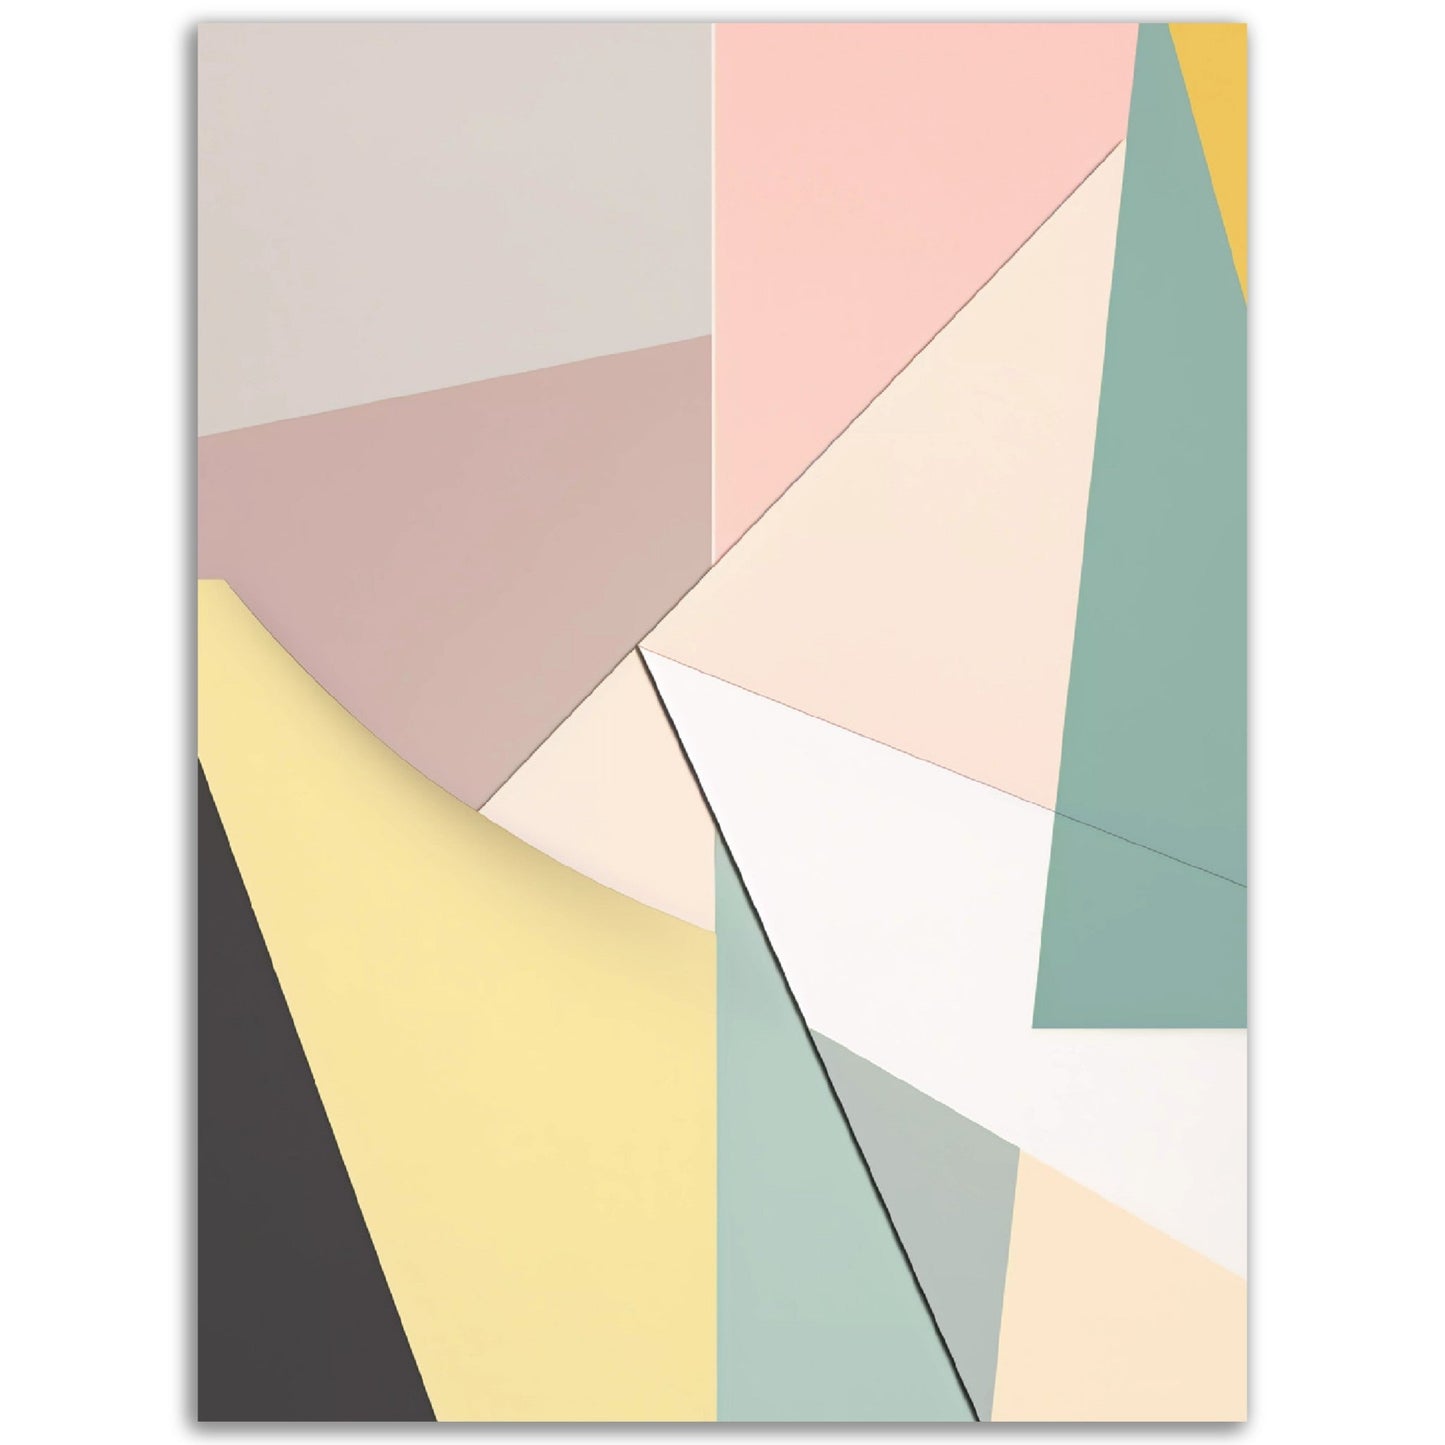 A vibrant Minimal Folded Abstraction poster with geometric shapes on a white background.